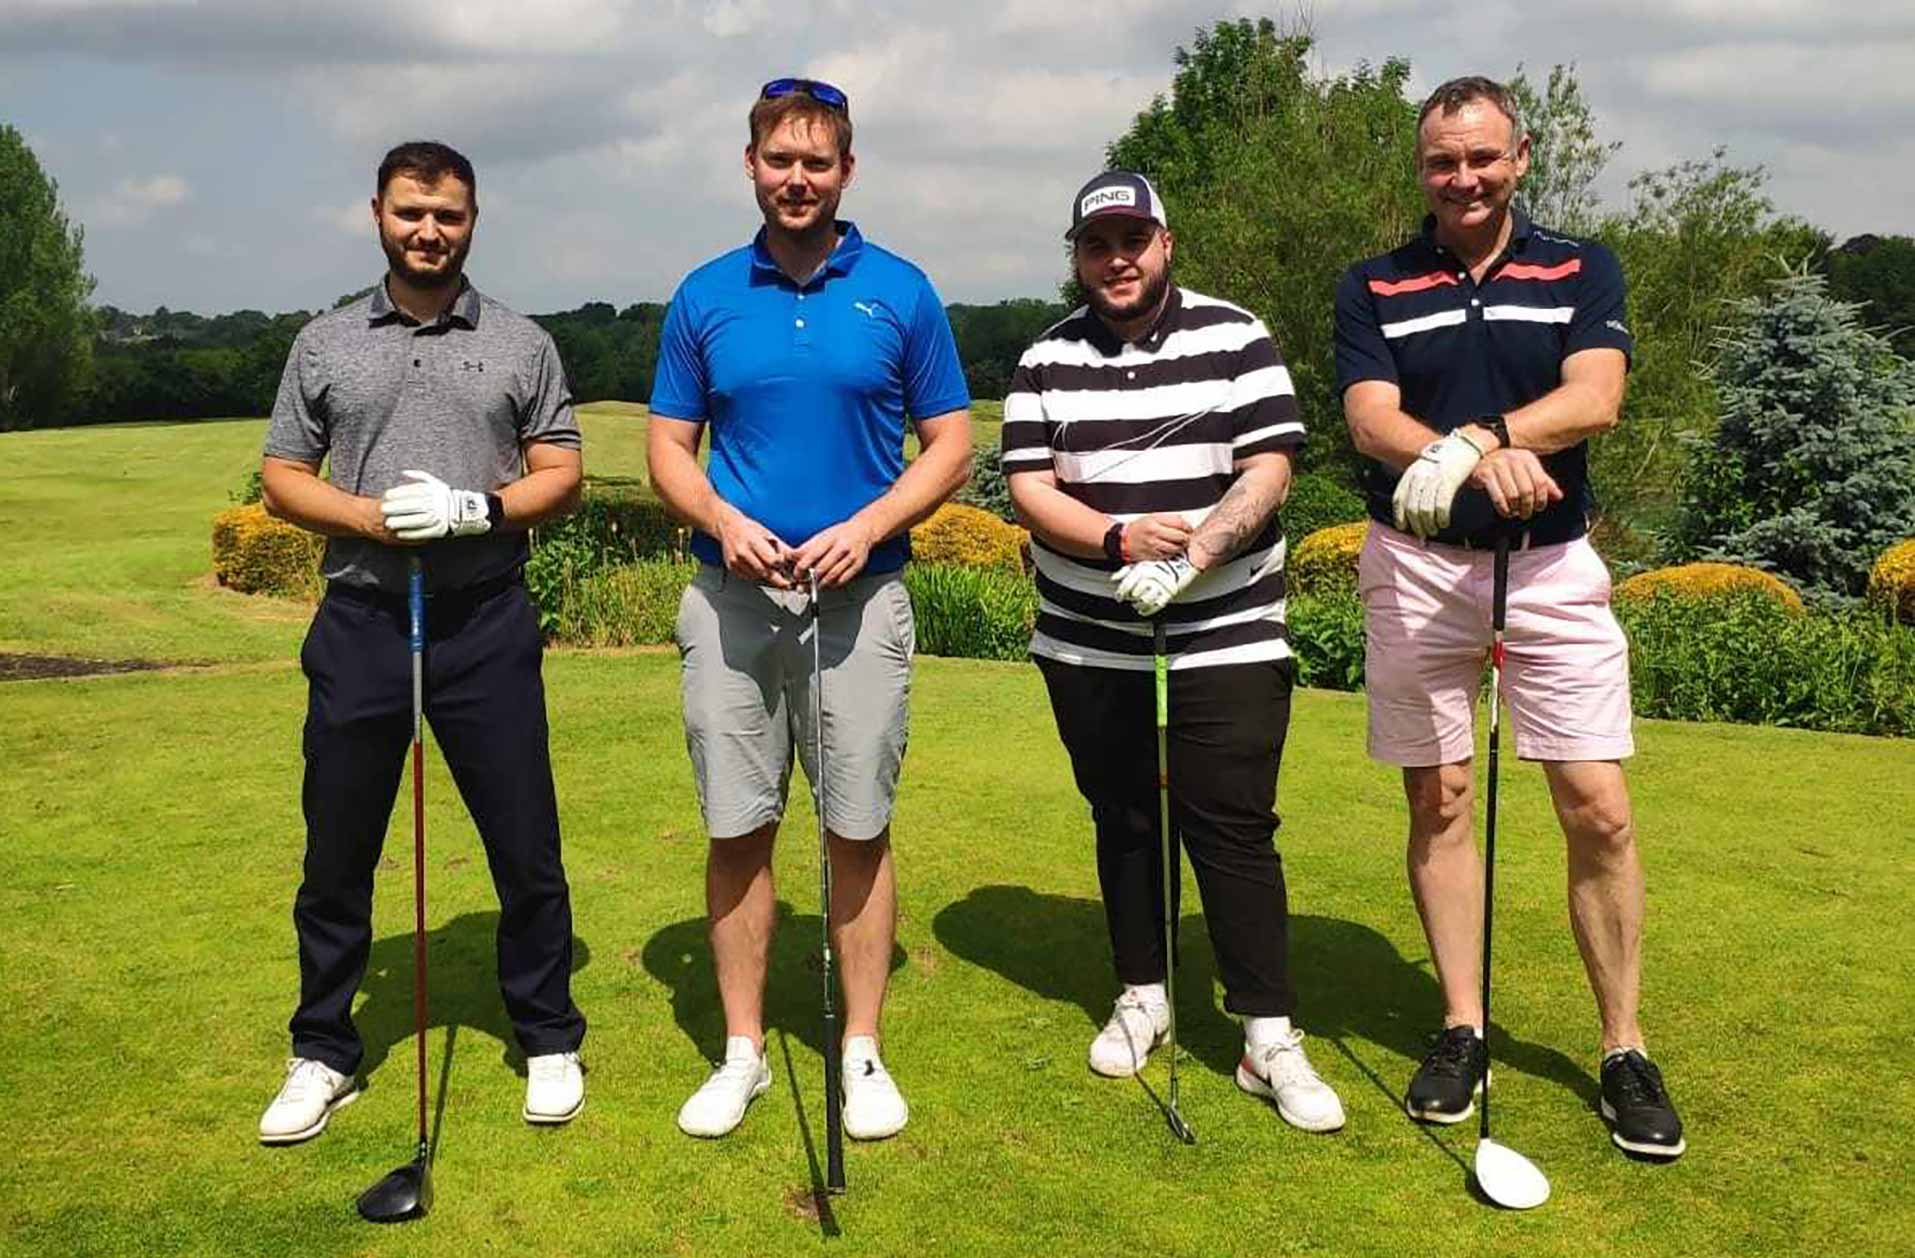 Wain Homes Severn Valley Golf Day raises £8,000 for Grief Encounter